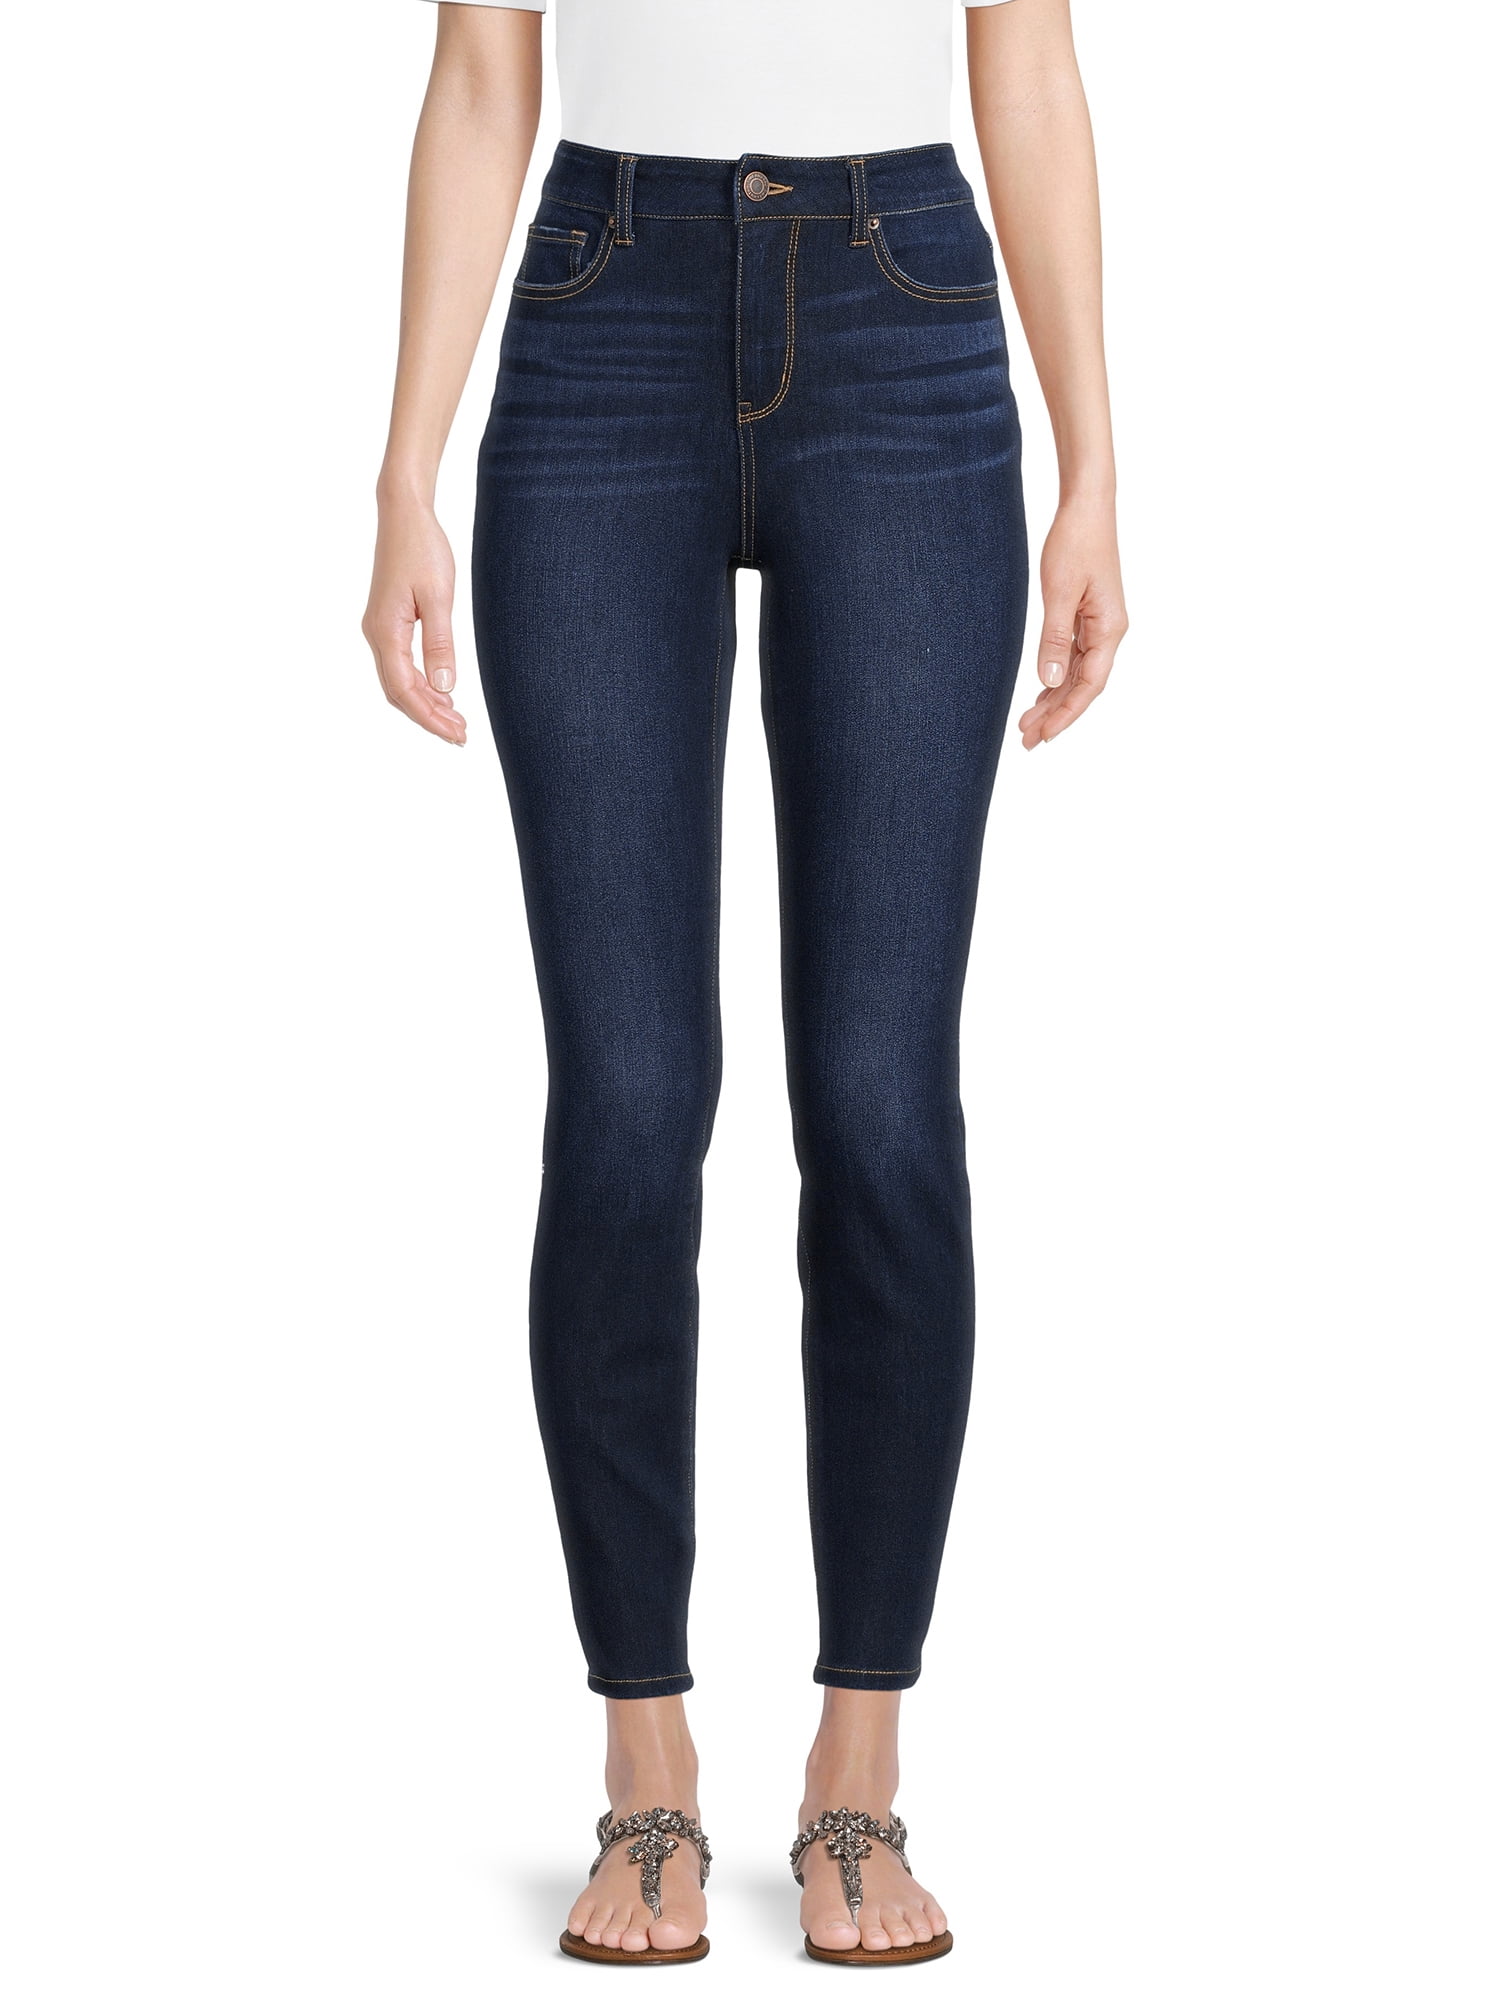 Time and Tru Women's High Rise Skinny Jeans, 29 Inseam for